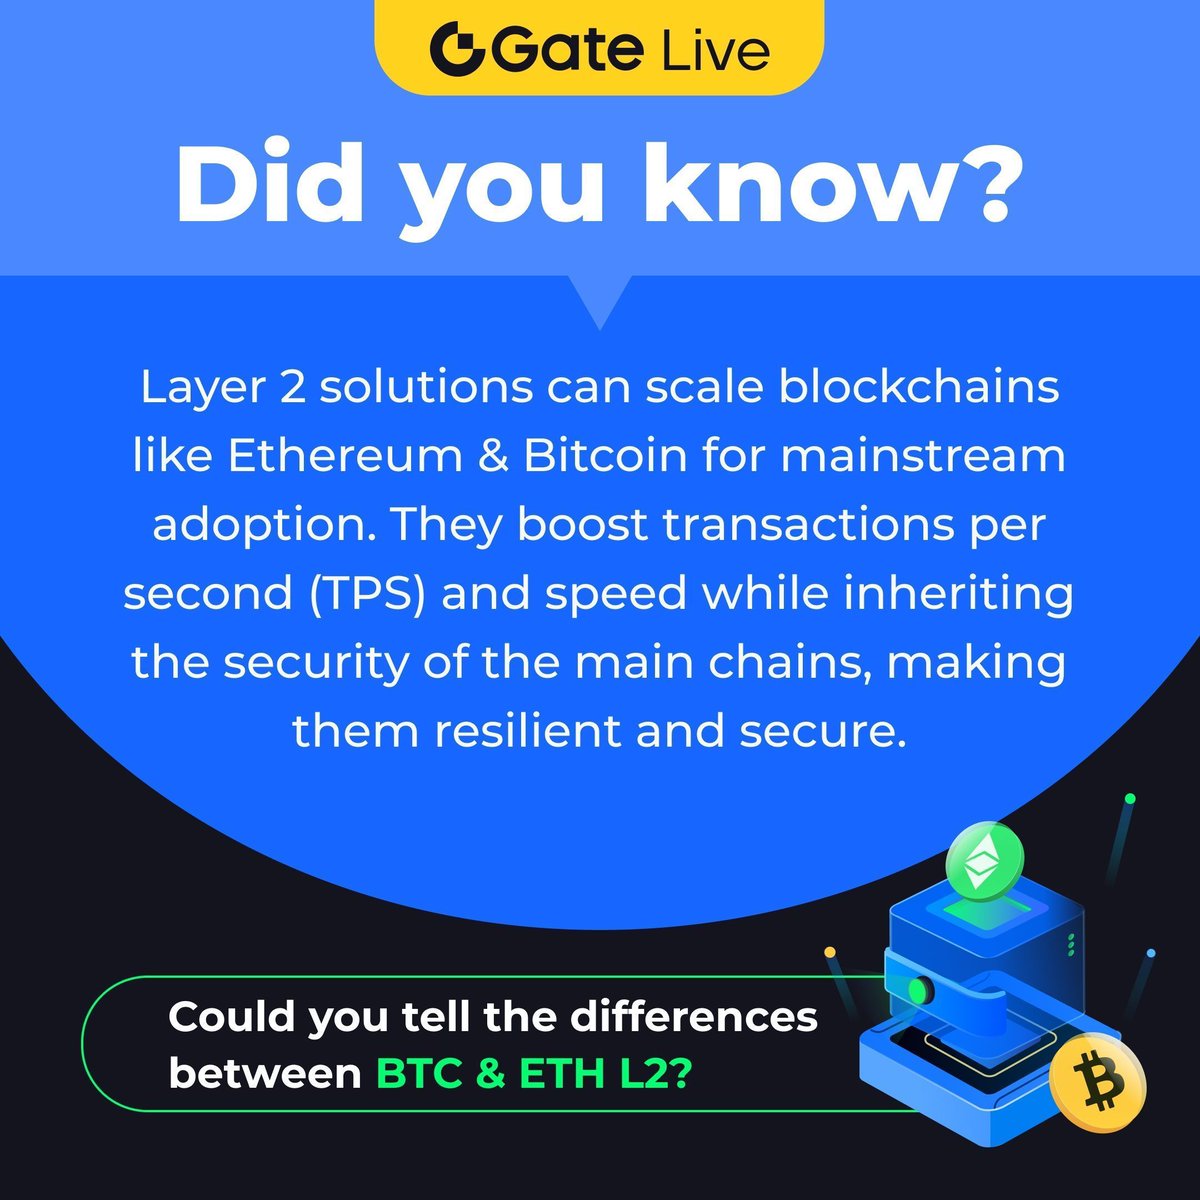 Wanna know more about the difference between BTC L2 and ETH L2? Stay tuned with our Crypto Talk today: ⏰May 30, 12:00 (UTC) 🔗gate.io/live/video/9c7…